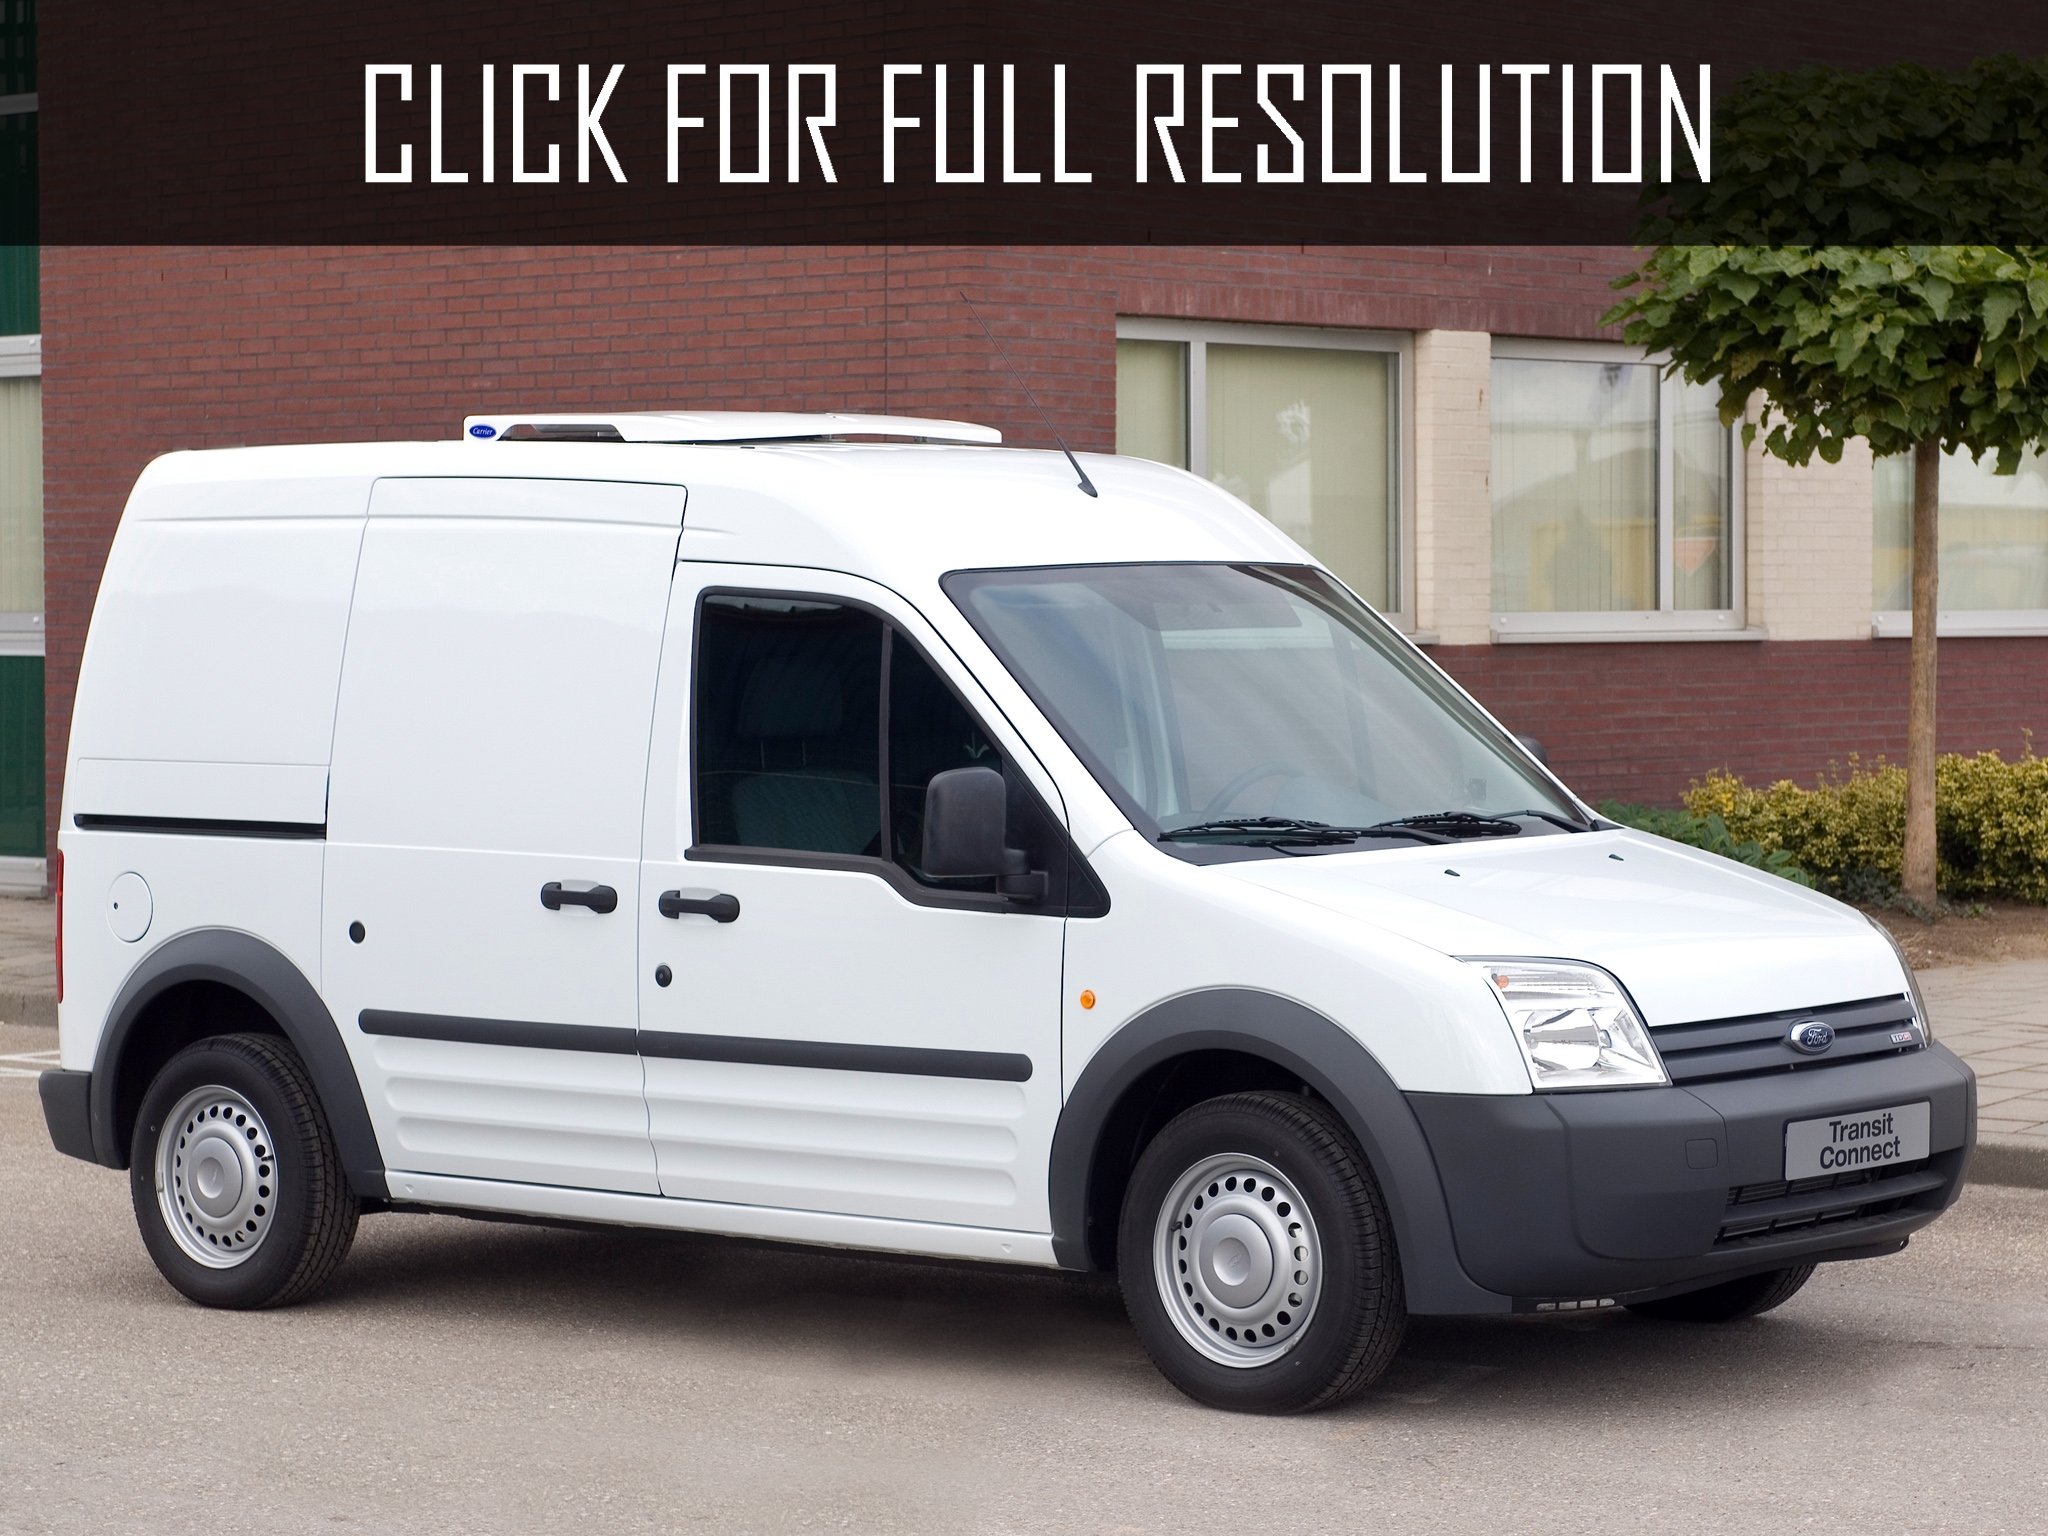 2006 Ford Transit Connect news, reviews, msrp, ratings